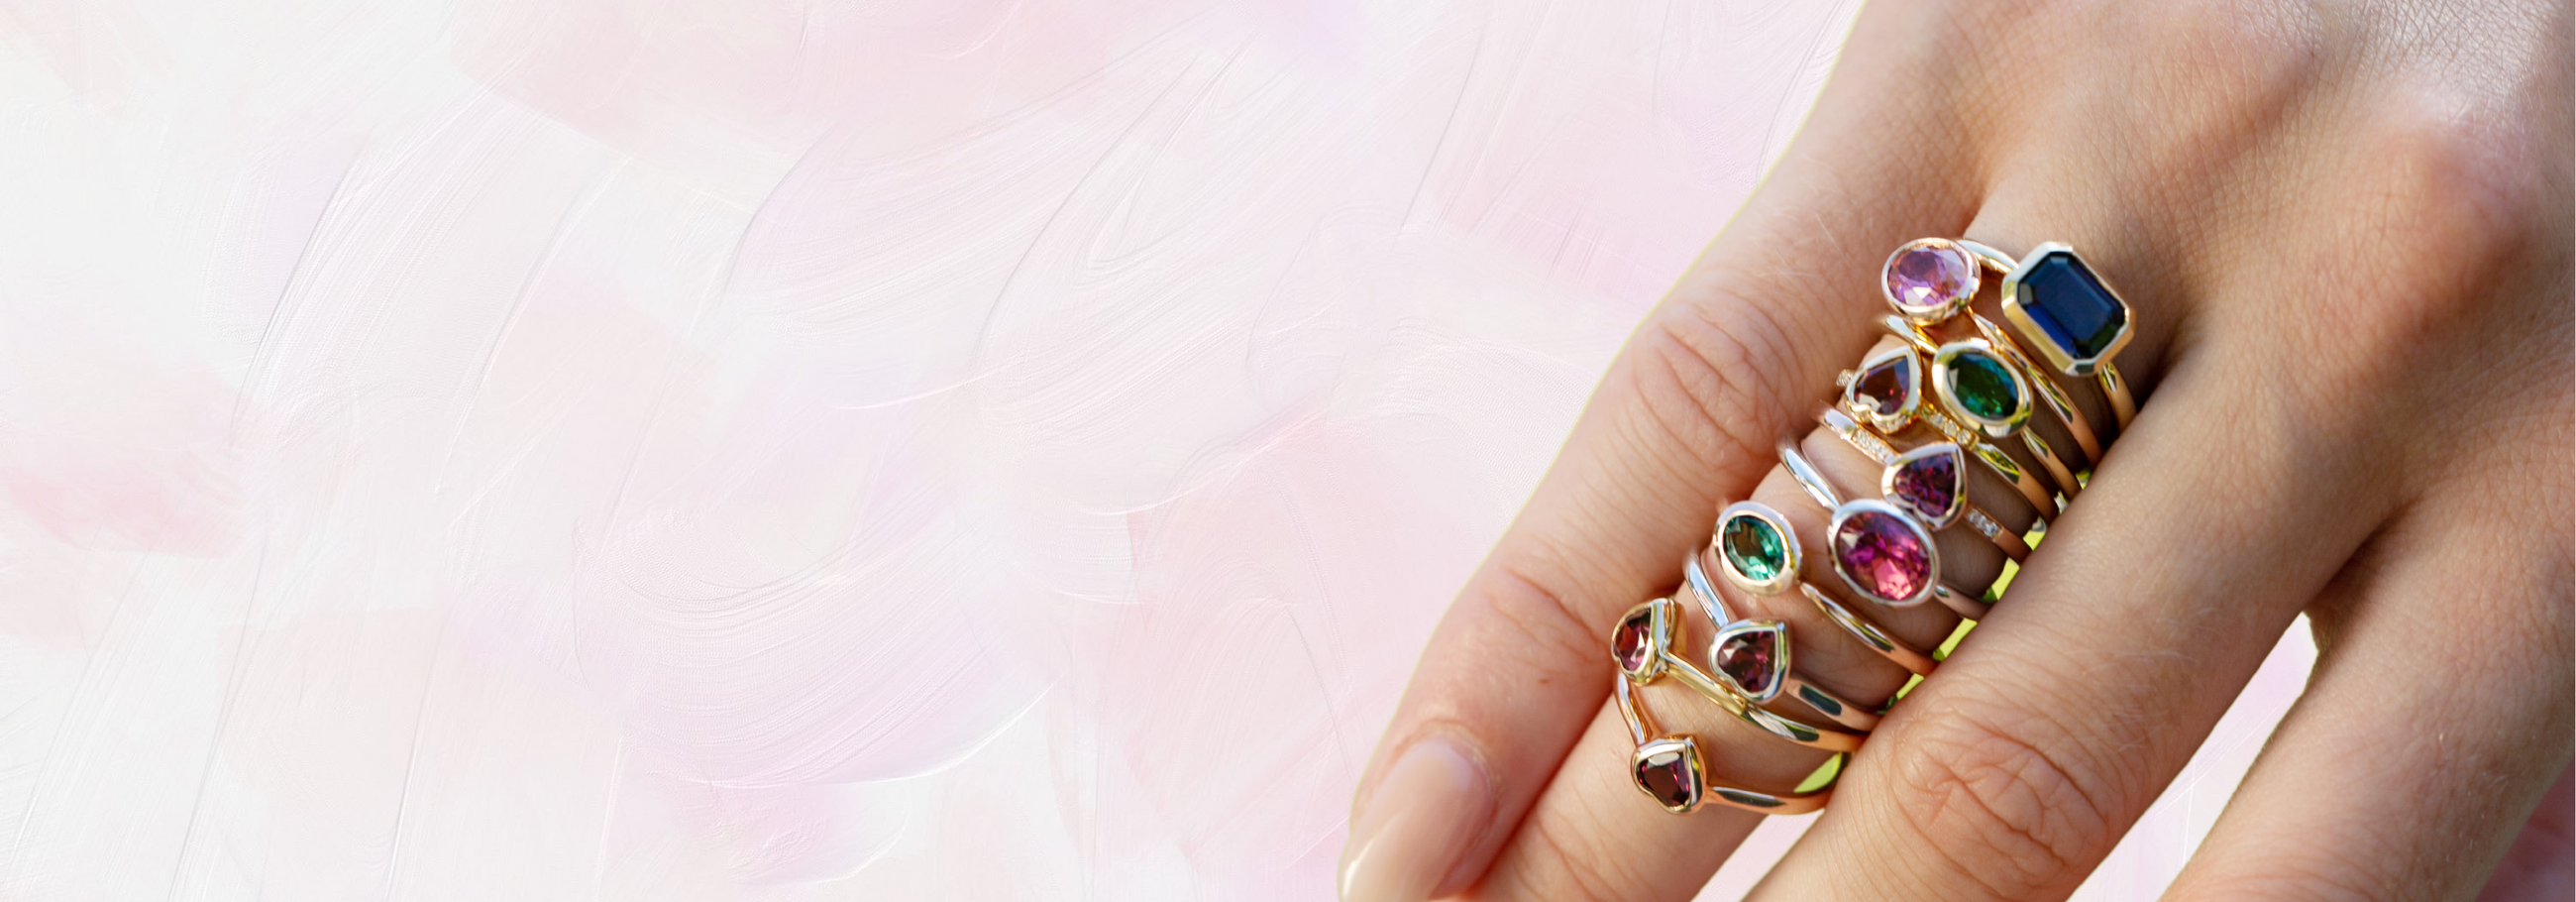 Add a pop of color to your style with our curated collection of colored gemstone stacking rings. Perfectly crafted to mix, match, and stack, these vibrant rings are the ideal gifts for creating a personalized and stylish look.